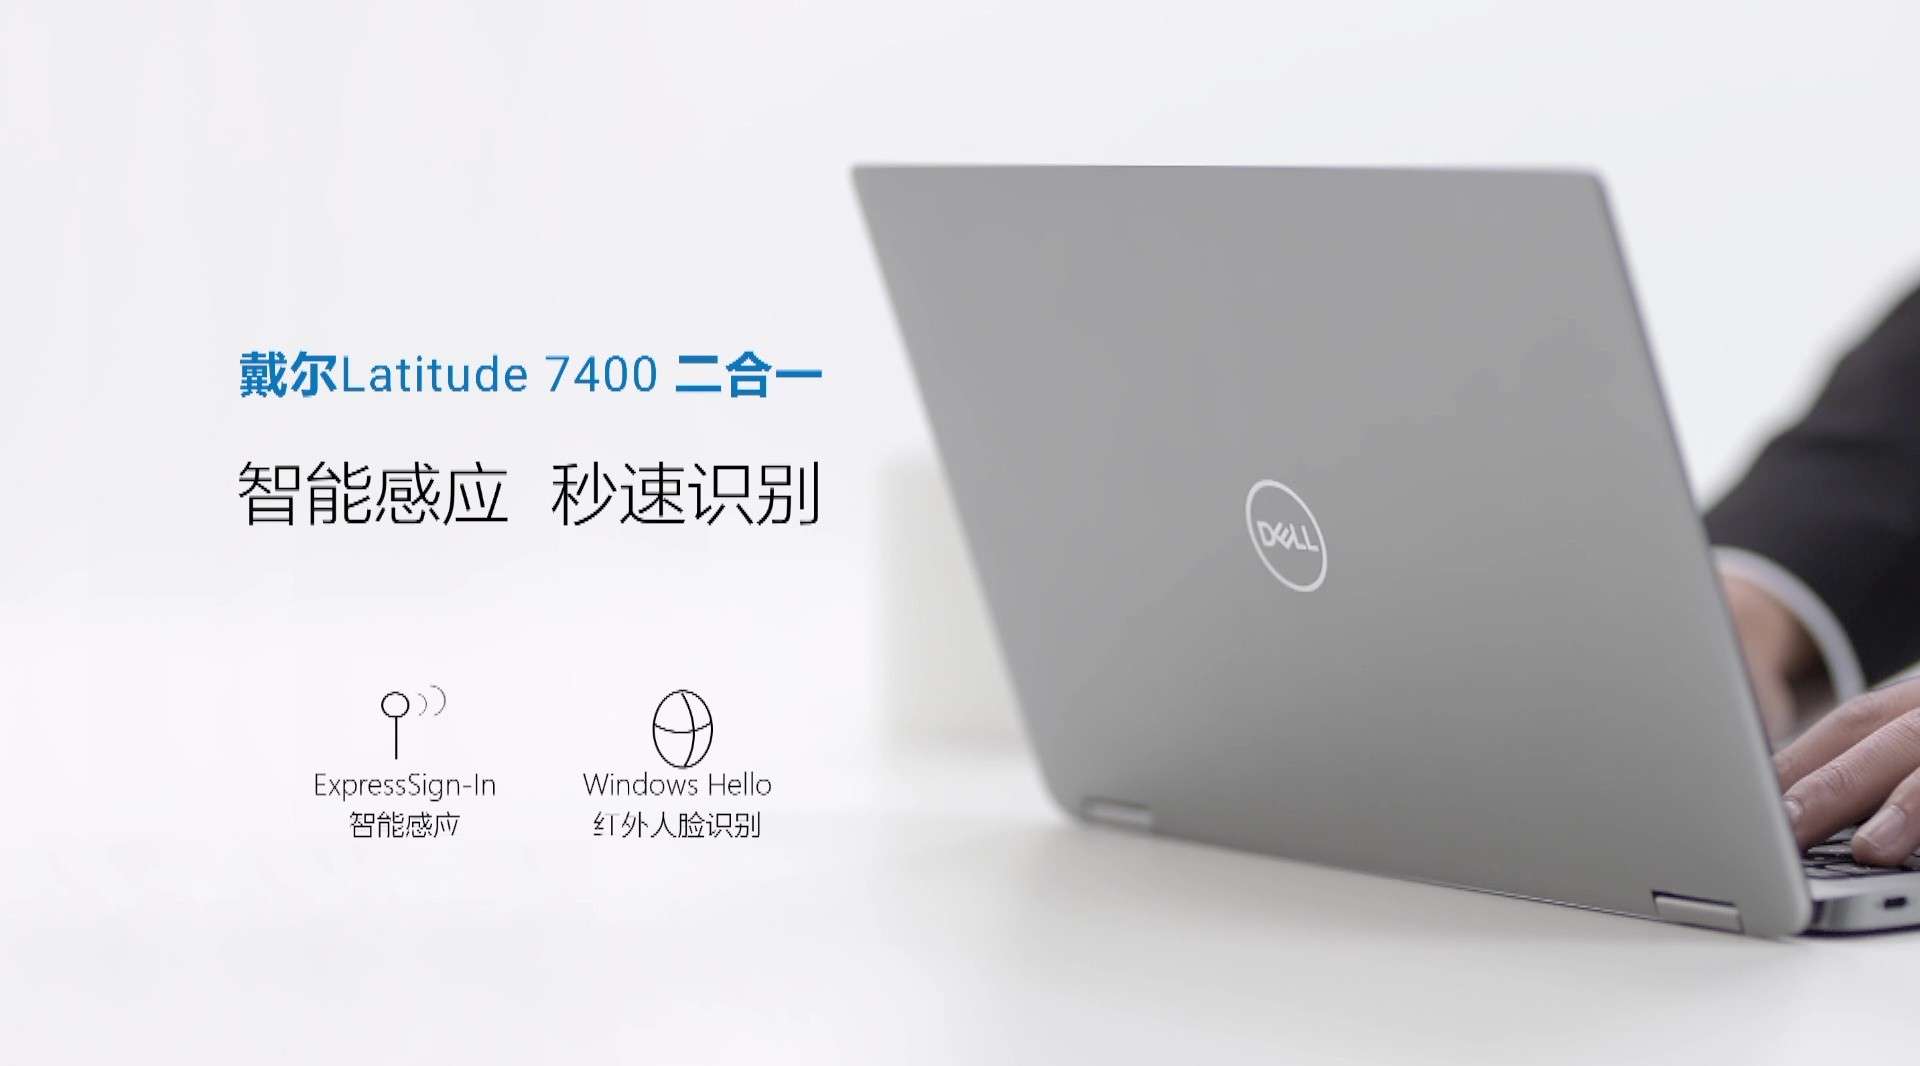 Dell 7400人脸识别篇